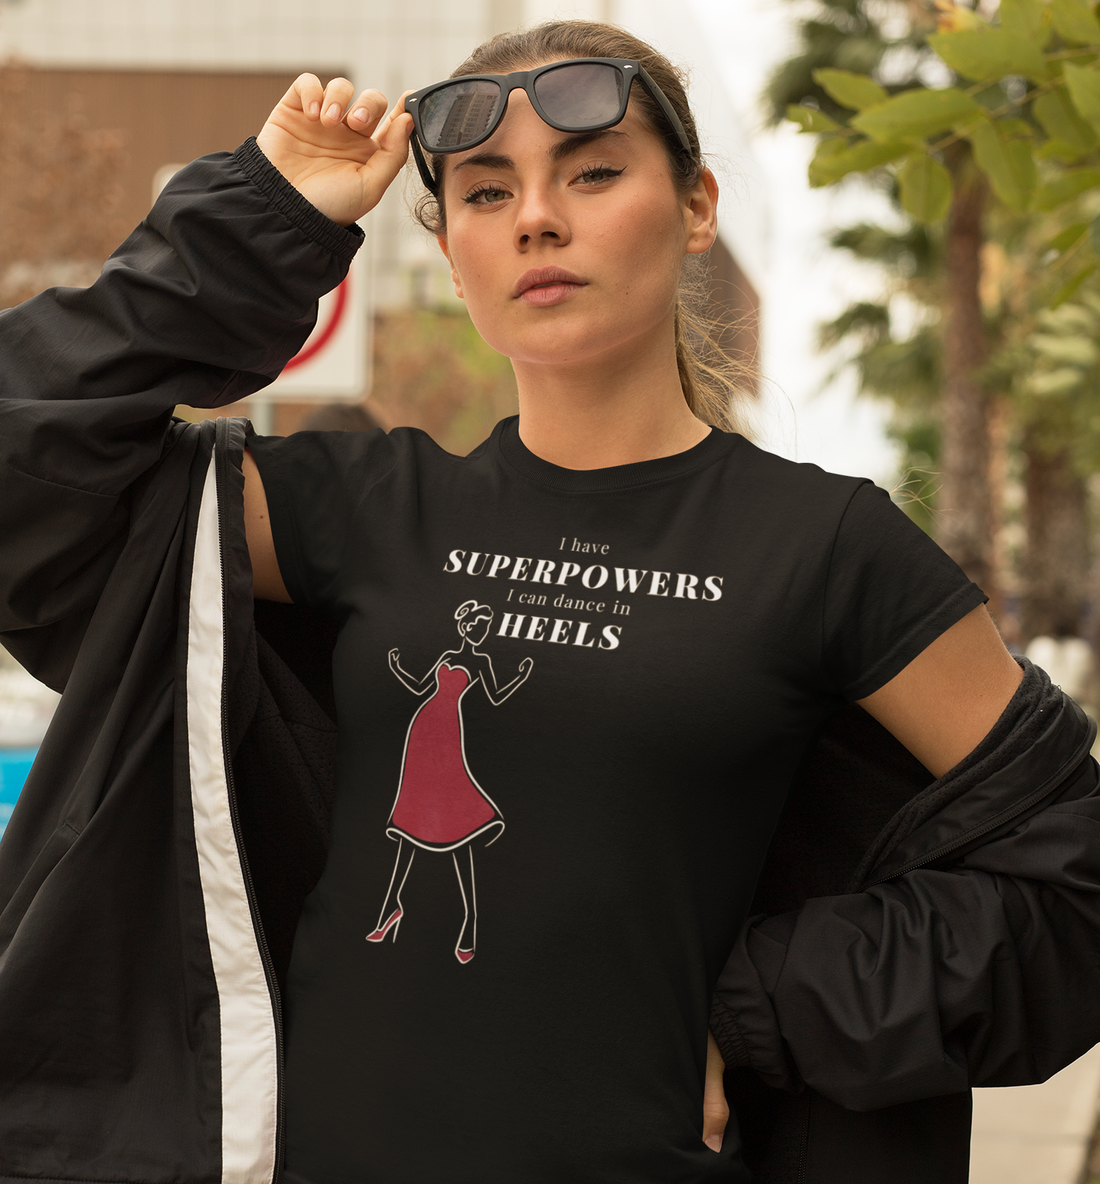 Dance t shirt design with the text "I have superpowers i can dance in heels". A dance tshirt for the brave Tango dancers, salsa dancers and those who do pole dance and perform challenging manoeuvres and at the same time wearing heels!